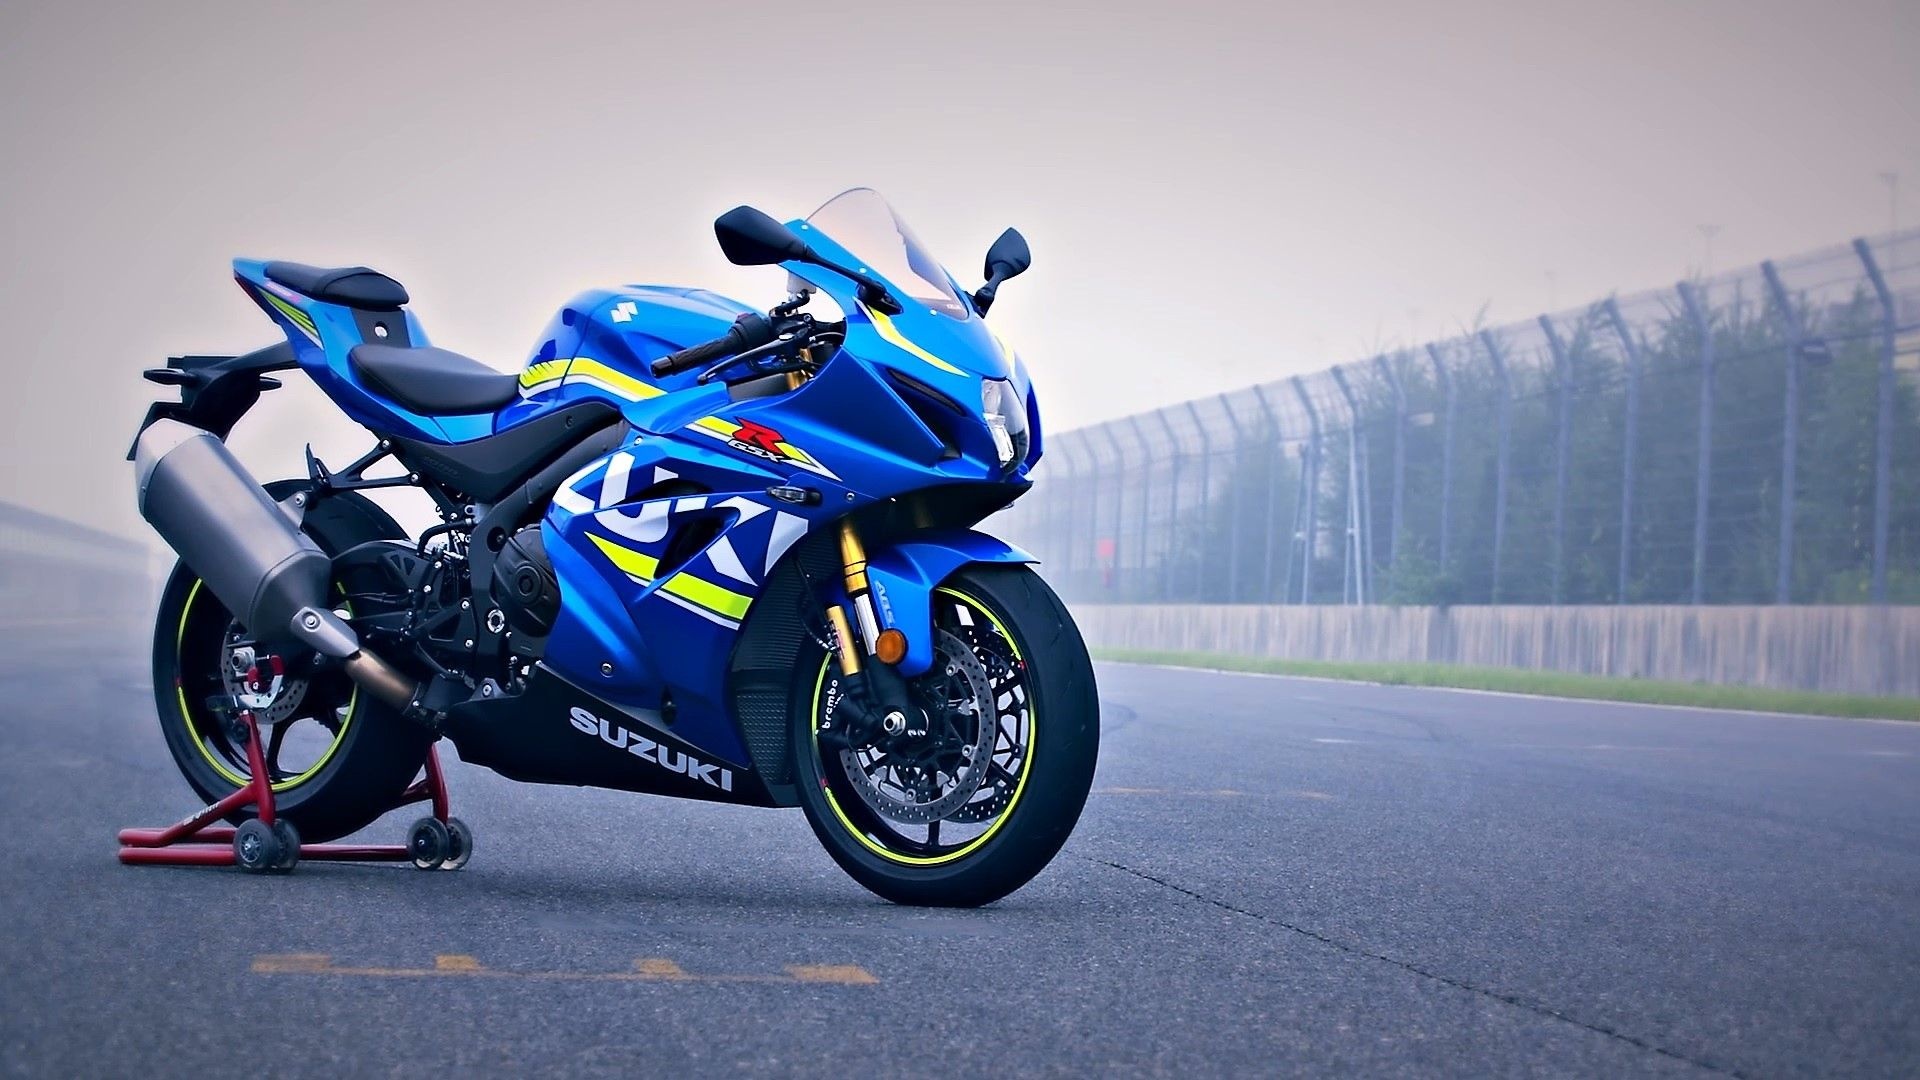 Suzuki GSX-R1000, Top-quality wallpapers, Exhilarating backgrounds, Rocbiker-approved, 1920x1080 Full HD Desktop